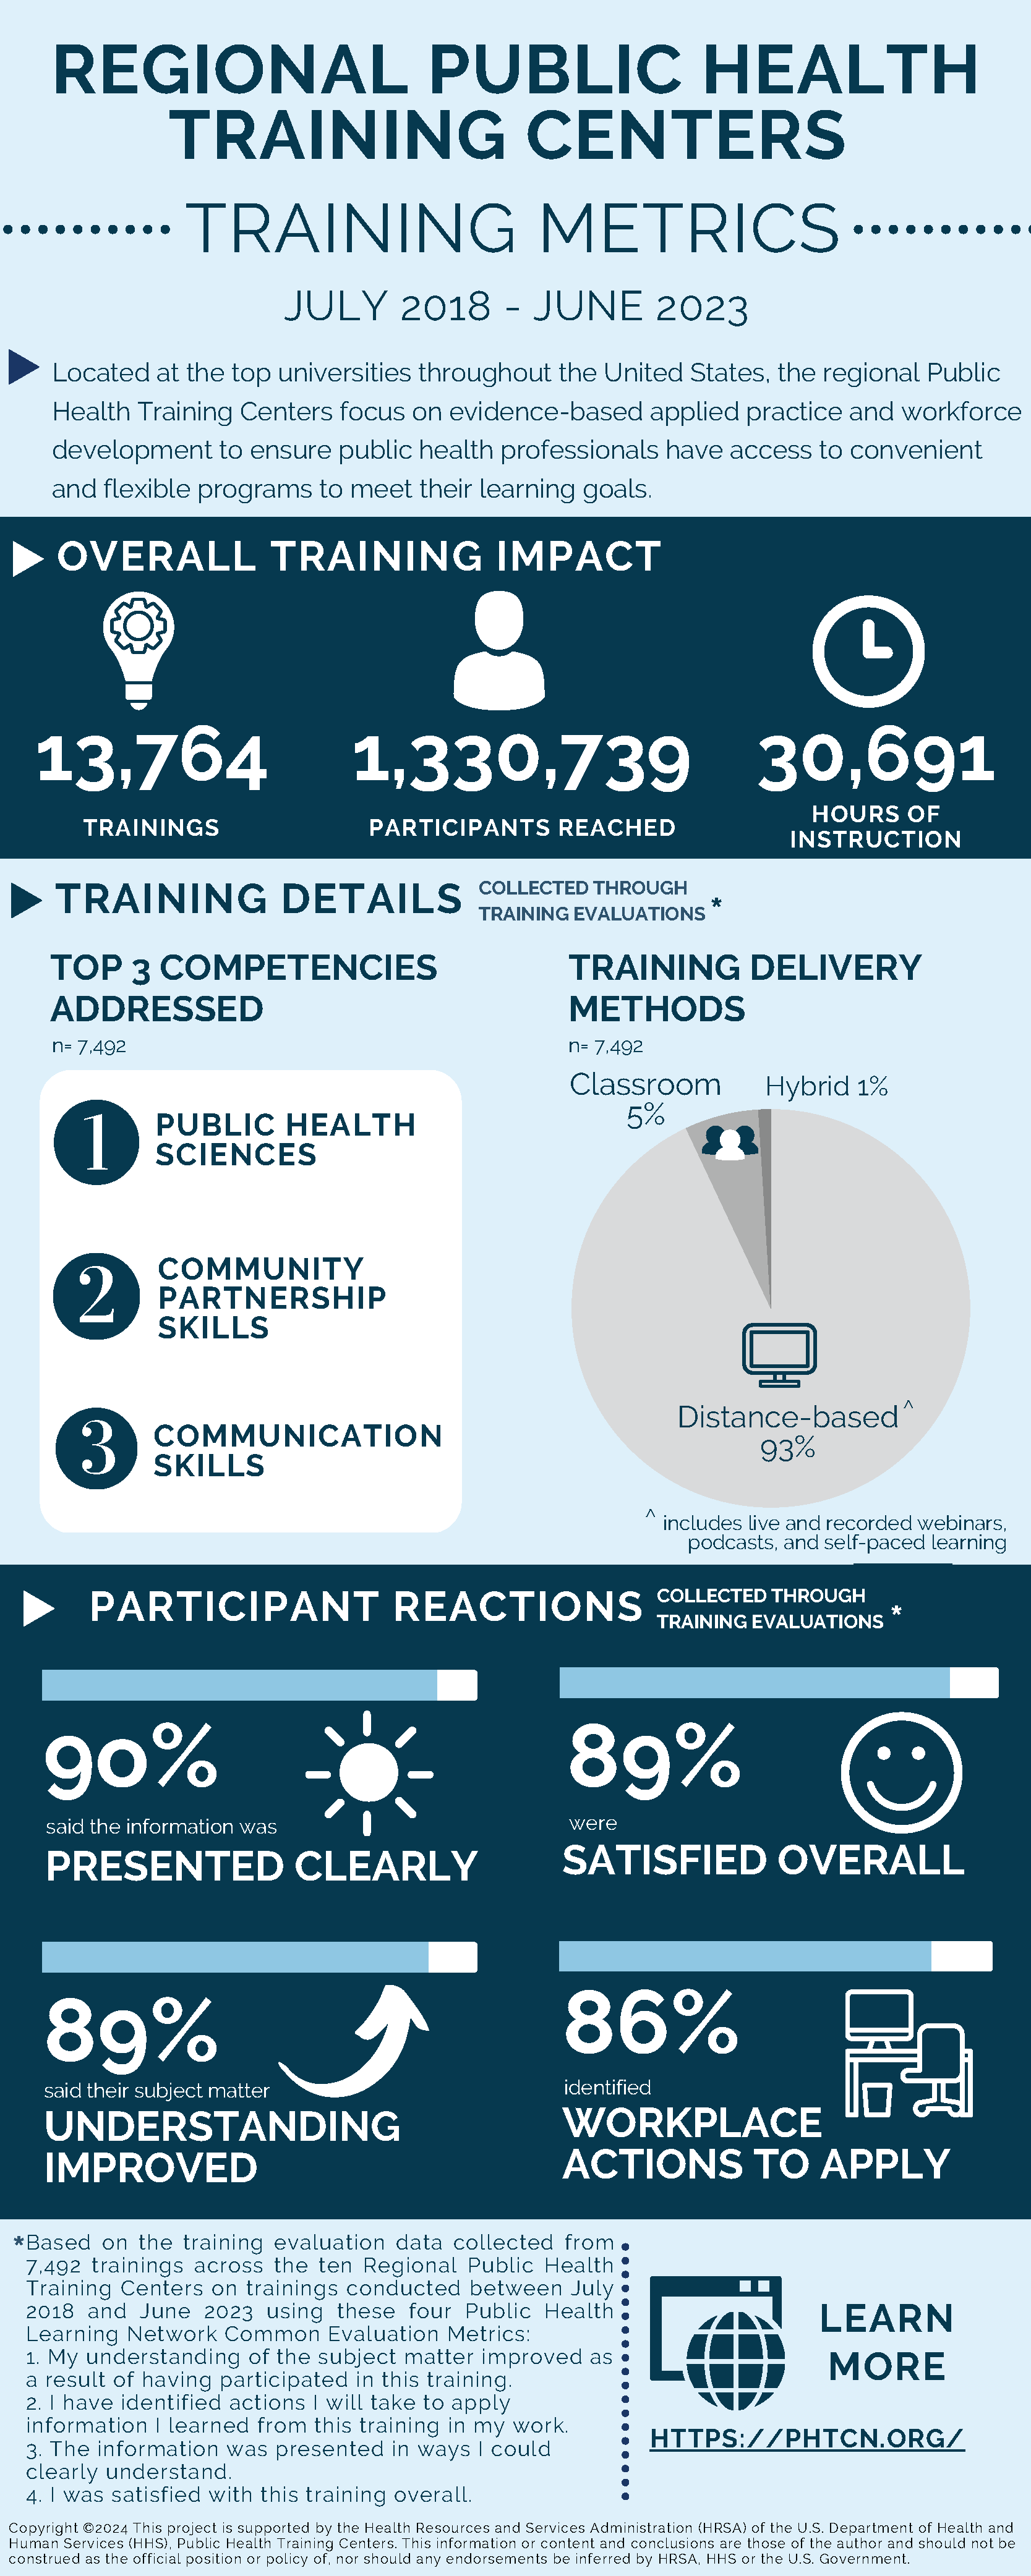 REGIONAL PUBLIC HEALTH<br />
TRAINING CENTERS<br />
TRAINING METRICS<br />
JULY 2018 - JUNE 2023<br />
Located at the top universities throughout the United States, the regional Public<br />
Health Training Centers focus on evidence-based applied practice and workforce<br />
development to ensure public health professionals have access to convenient<br />
and flexible programs to meet their learning goals.<br />
OVERALL TRAINING IMPACT<br />
13,764 TRAININGS<br />
1,330,739 PARTICIPANTS REACHED<br />
30,691 HOURS OF INSTRUCTION<br />
TRAINING DETAILS<br />
TOP 3 COMPETENCIES<br />
ADDRESSED n=7492<br />
1. PUBLIC HEALTH<br />
SCIENCES<br />
2. COMMUNITY<br />
PARTNERSHIP<br />
SKILLS<br />
3. COMMUNICATION SKILLS<br />
TRAINING DELIVERY<br />
METHODS n=7942<br />
Distance-based (includes live and recorded webinars,<br />
podcasts, and self-paced learning) (93%), Classroom (5%), Hybrid (1%)<br />
PARTICIPANT REACTIONS<br />
9o% said the information was PRESENTED CLEARLY<br />
89% were SATISFIED OVERALL<br />
89% said their subject matter UNDERSTANDING<br />
IMPROVED<br />
86% identified WORKPLACE ACTIONS TO APPLY<br />
*Based on the training evaluation data collected from<br />
7,492 trainings across the ten Regional Public Health<br />
Training Centers on trainings conducted between July<br />
2018 and June 2023 using these four Public Health<br />
Learning Network Common Evaluation Metrics:<br />
1. My understanding of the subject matter improved as<br />
a result of having participated in this training.<br />
2. I have identified actions I will take to apply<br />
information I learned from this training in my work.<br />
3. The information was presented in ways I could<br />
clearly understand.<br />
4. I was satisfied with this training overall.<br />
LEARN MORE HTTPS://PHTCN.ORG